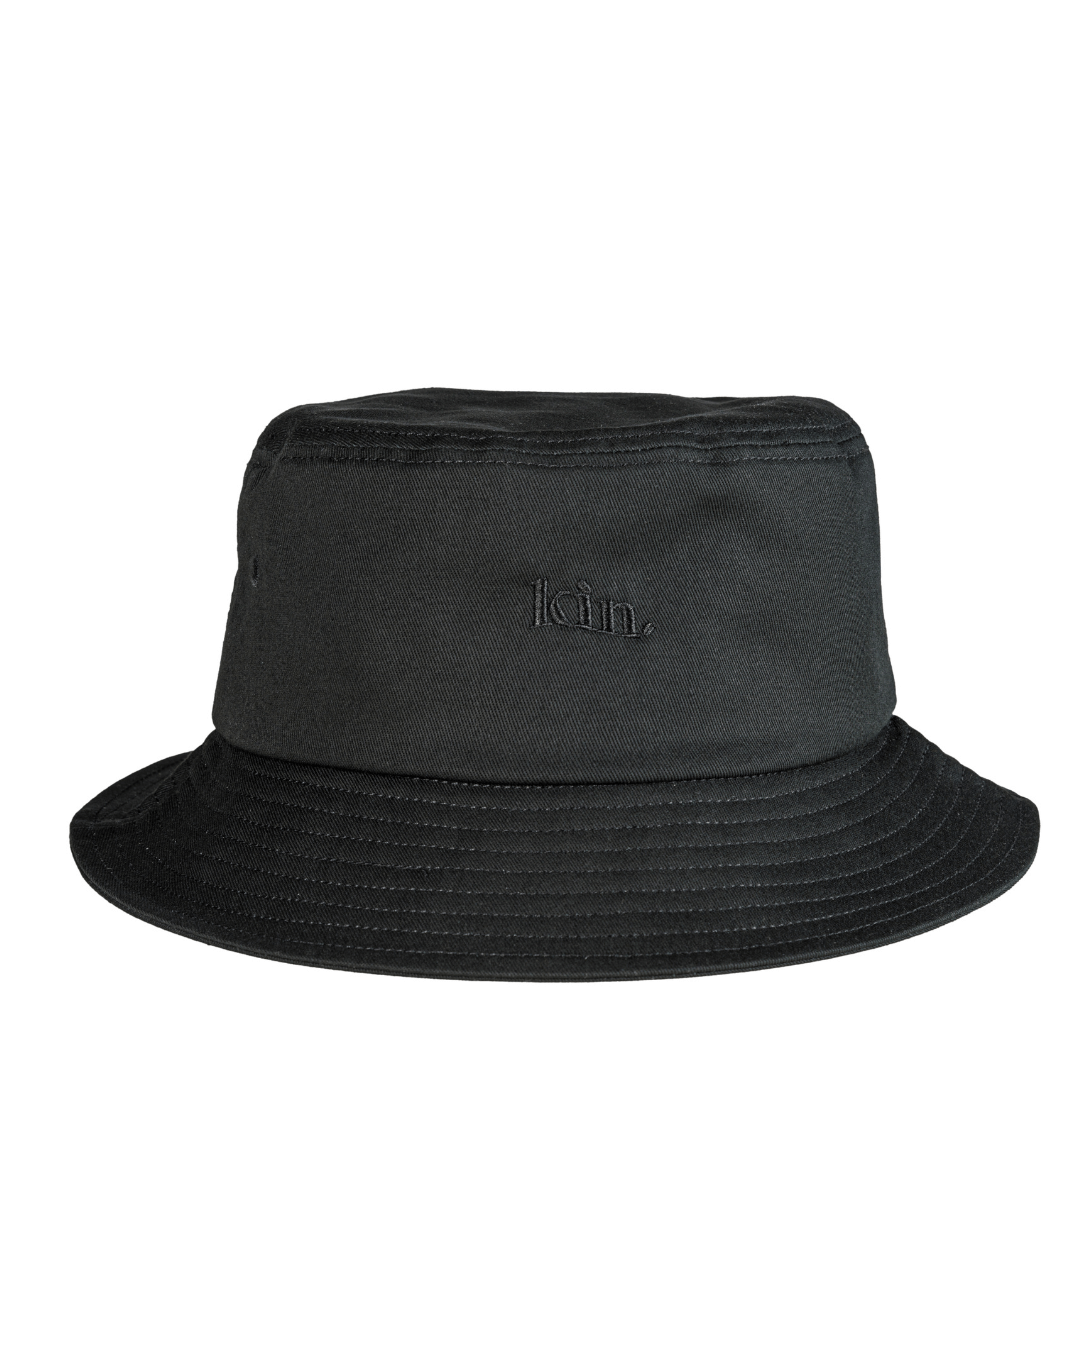 Satin Lined Bucket Hat for Curly Hair - Bucket Hat - Black by Beautifully Warm